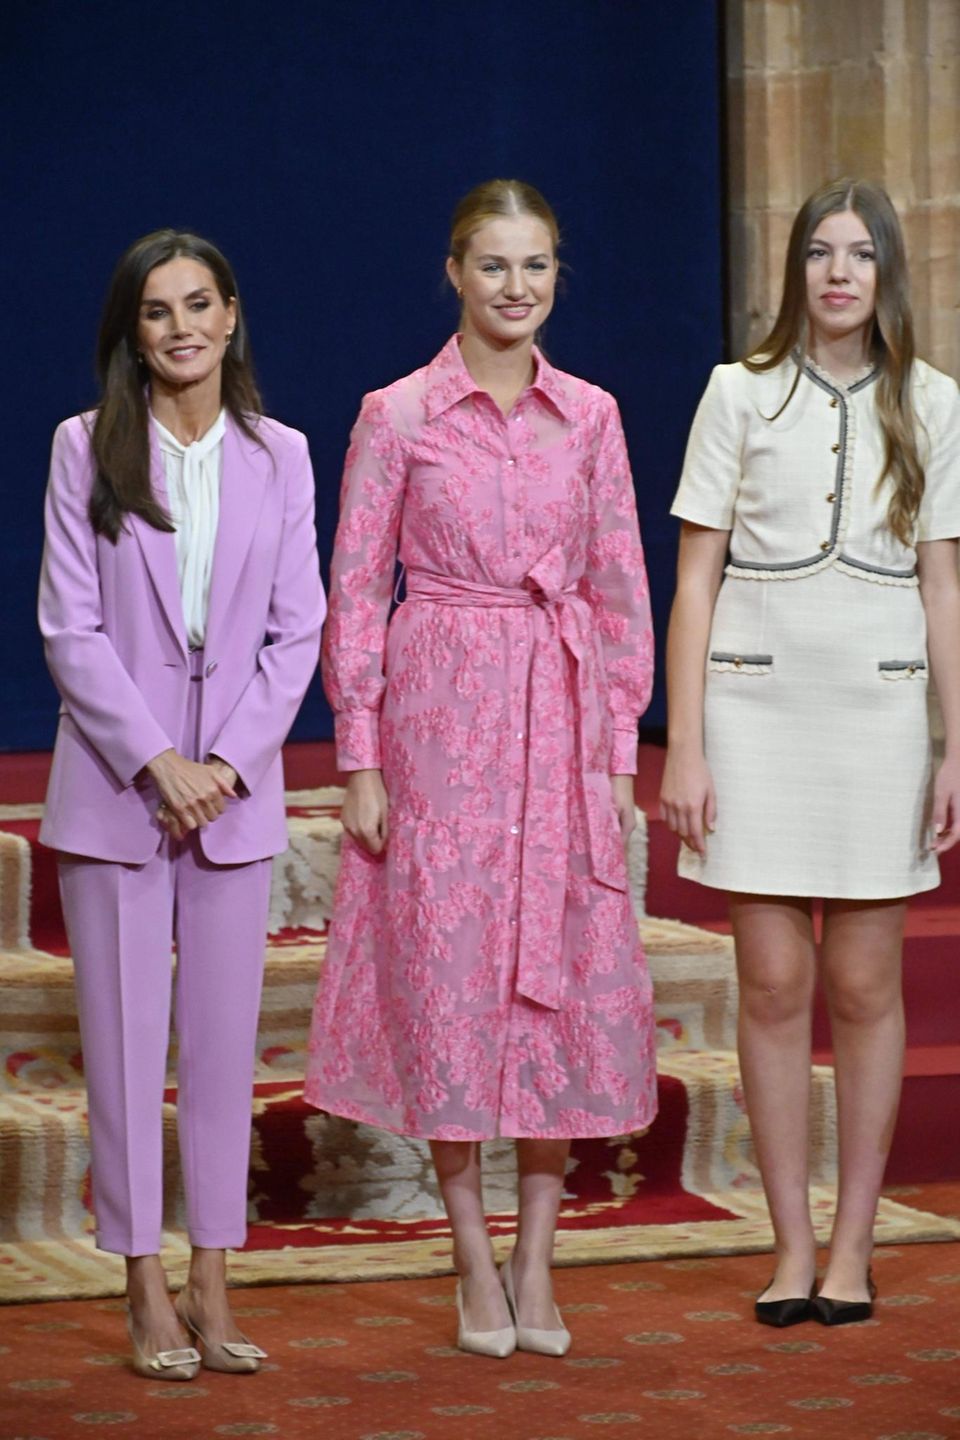 Queen Letizia, Princess Leonor, Princess Sofía, at the audiences of the Spanish royal family as part of the 2023 Princess of Asturias Awards ceremony in Oviedo. 